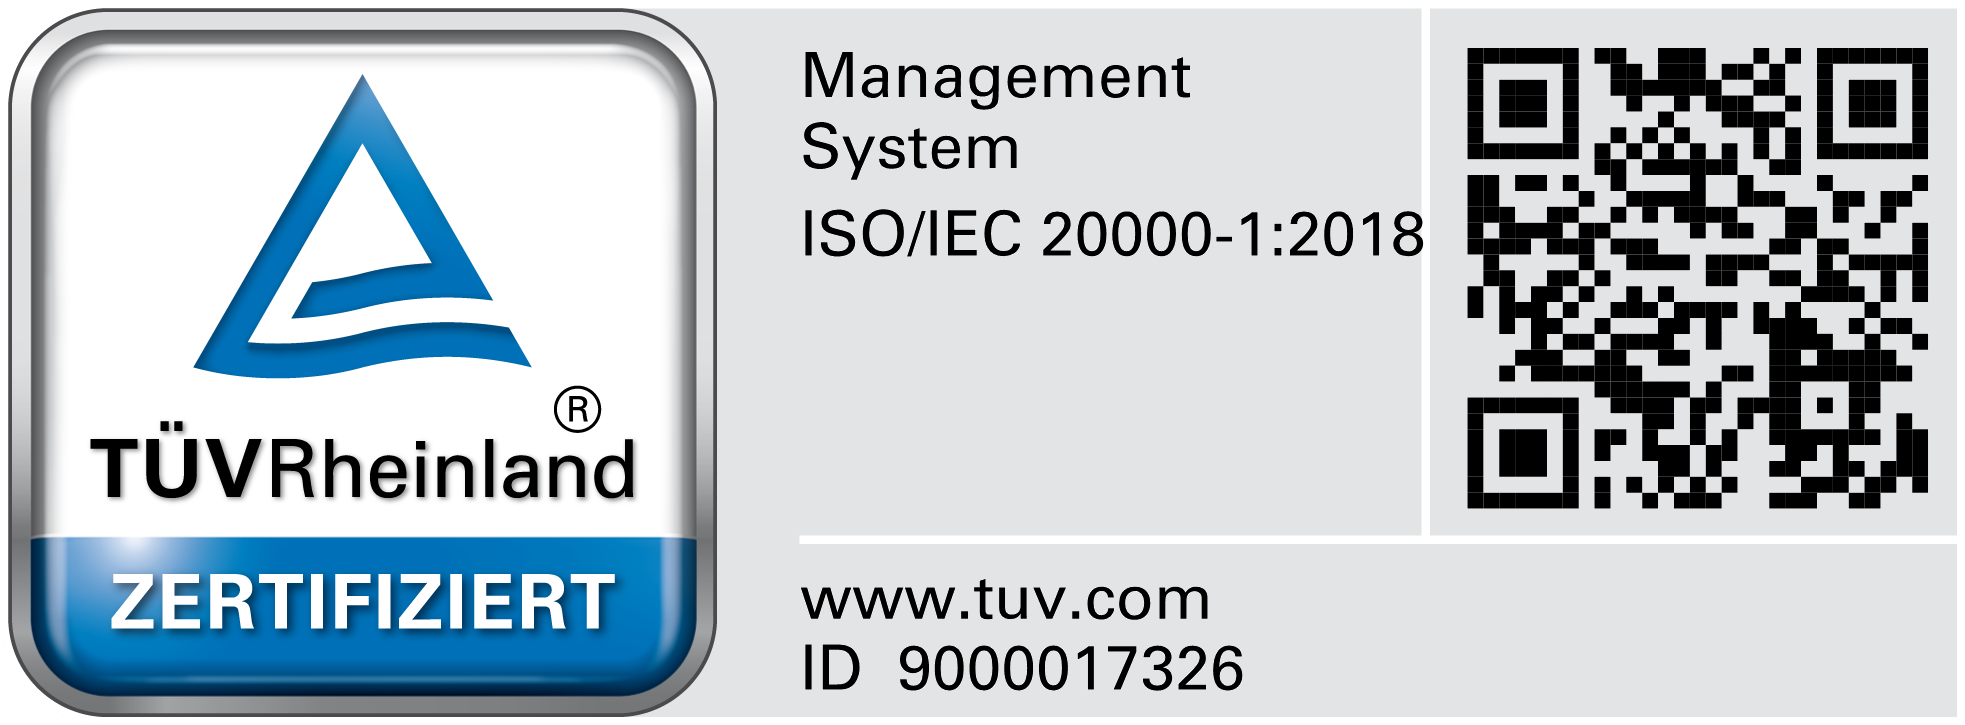 ISO-20000